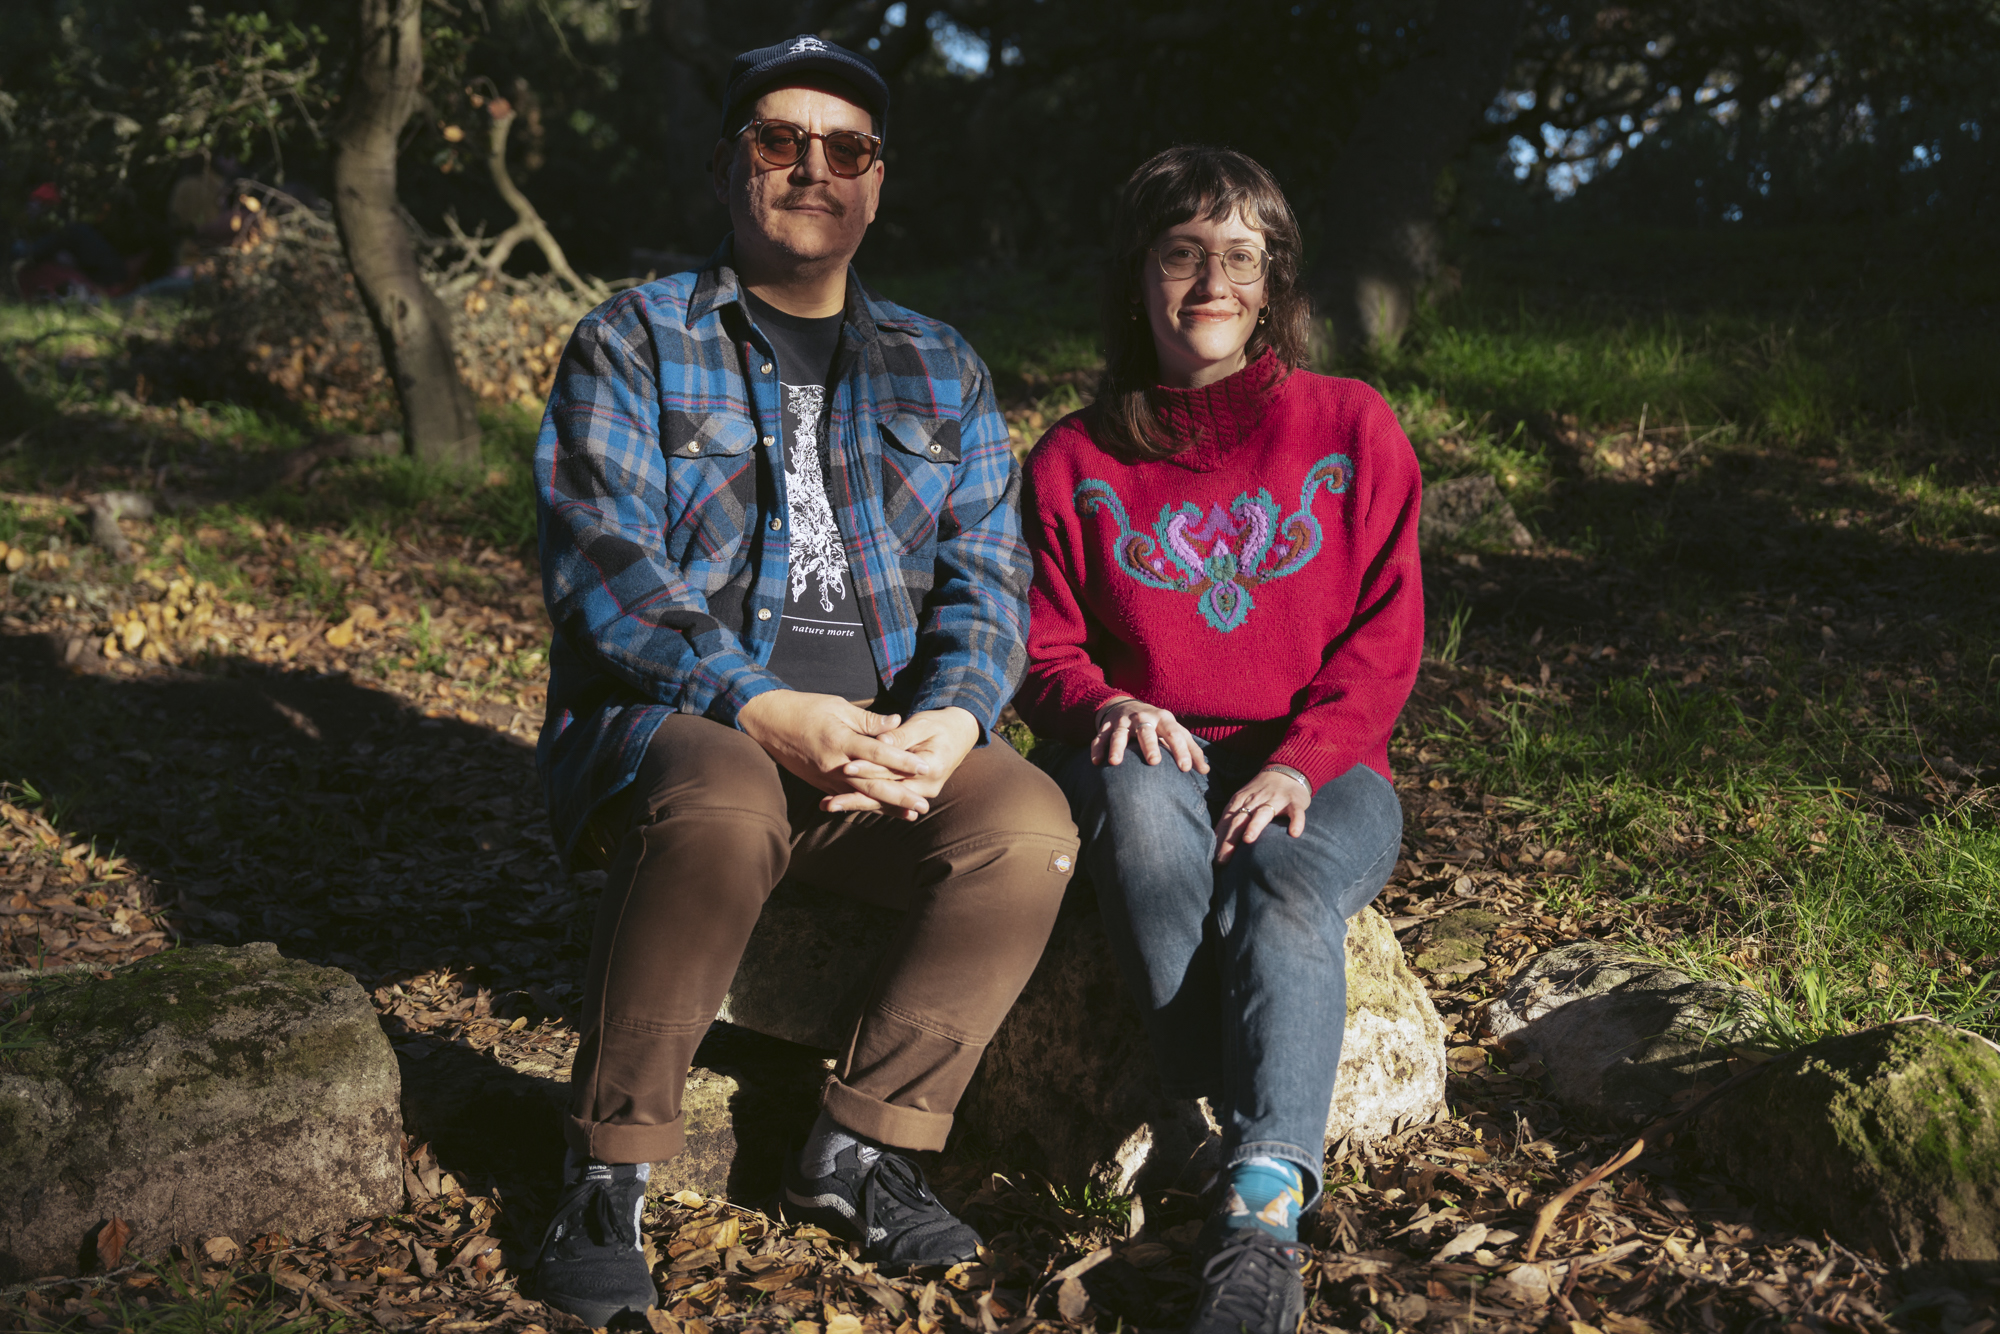 Two people sit next to each other in a wooded area, looking at the camera.